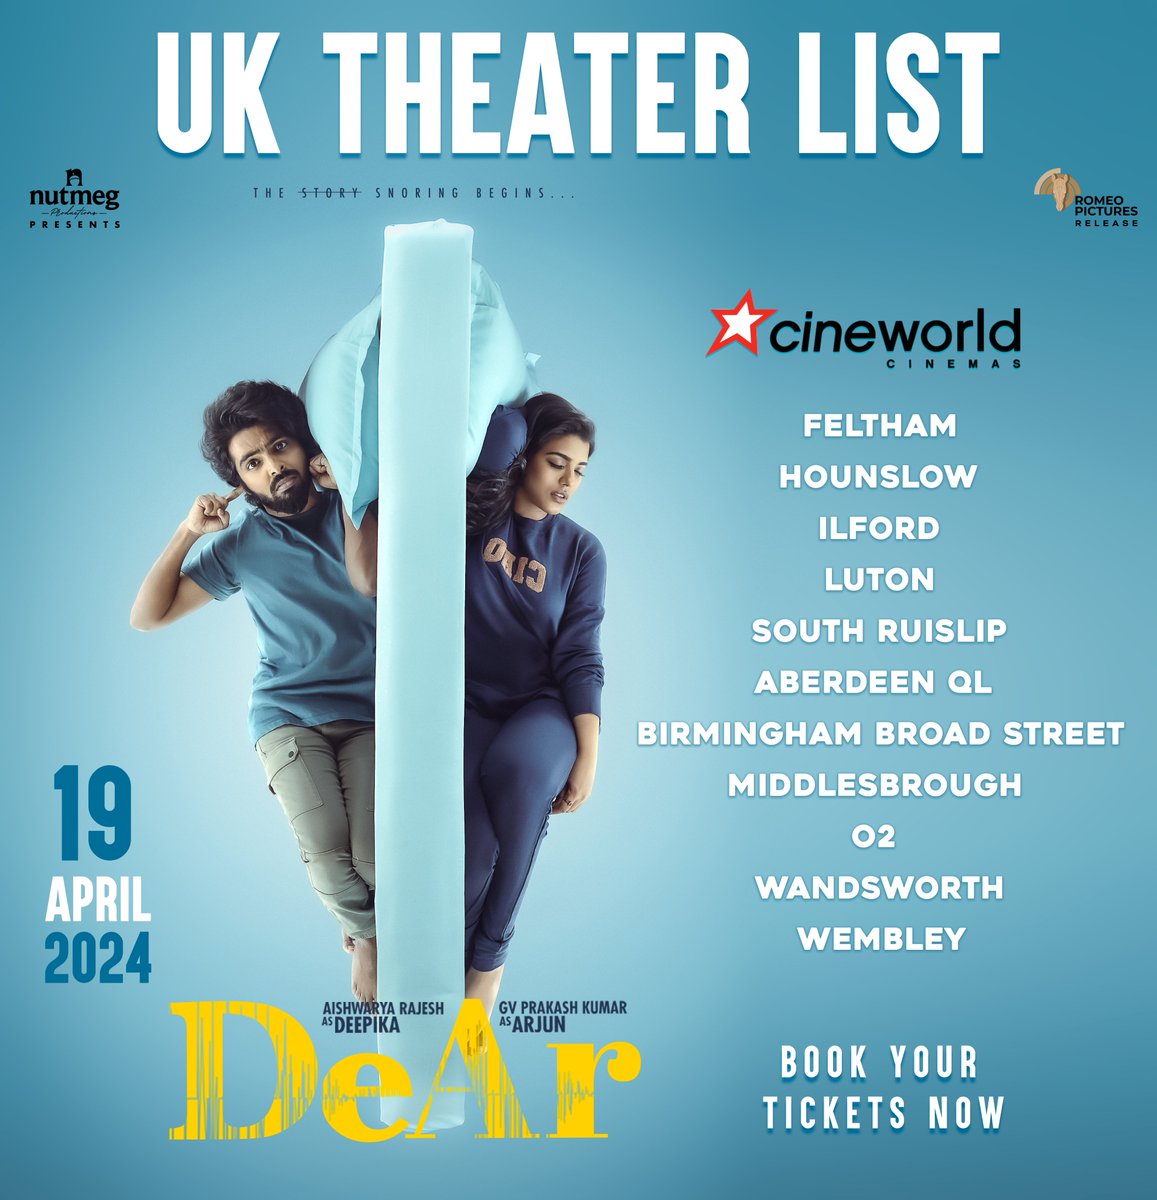 Join the snore-fest of laughter in our fun-filled 😴 #DeAr with your families for this weekend on UK Cinemas!

@tvaroon #AbhishekRamisetty #PruthvirajGK
@mynameisraahul #RomeoPictures
@saregamasouth @gvprakash
@aishu_dil @Anand_Rchandran @jagadeesh_s_v
@editor_rukesh